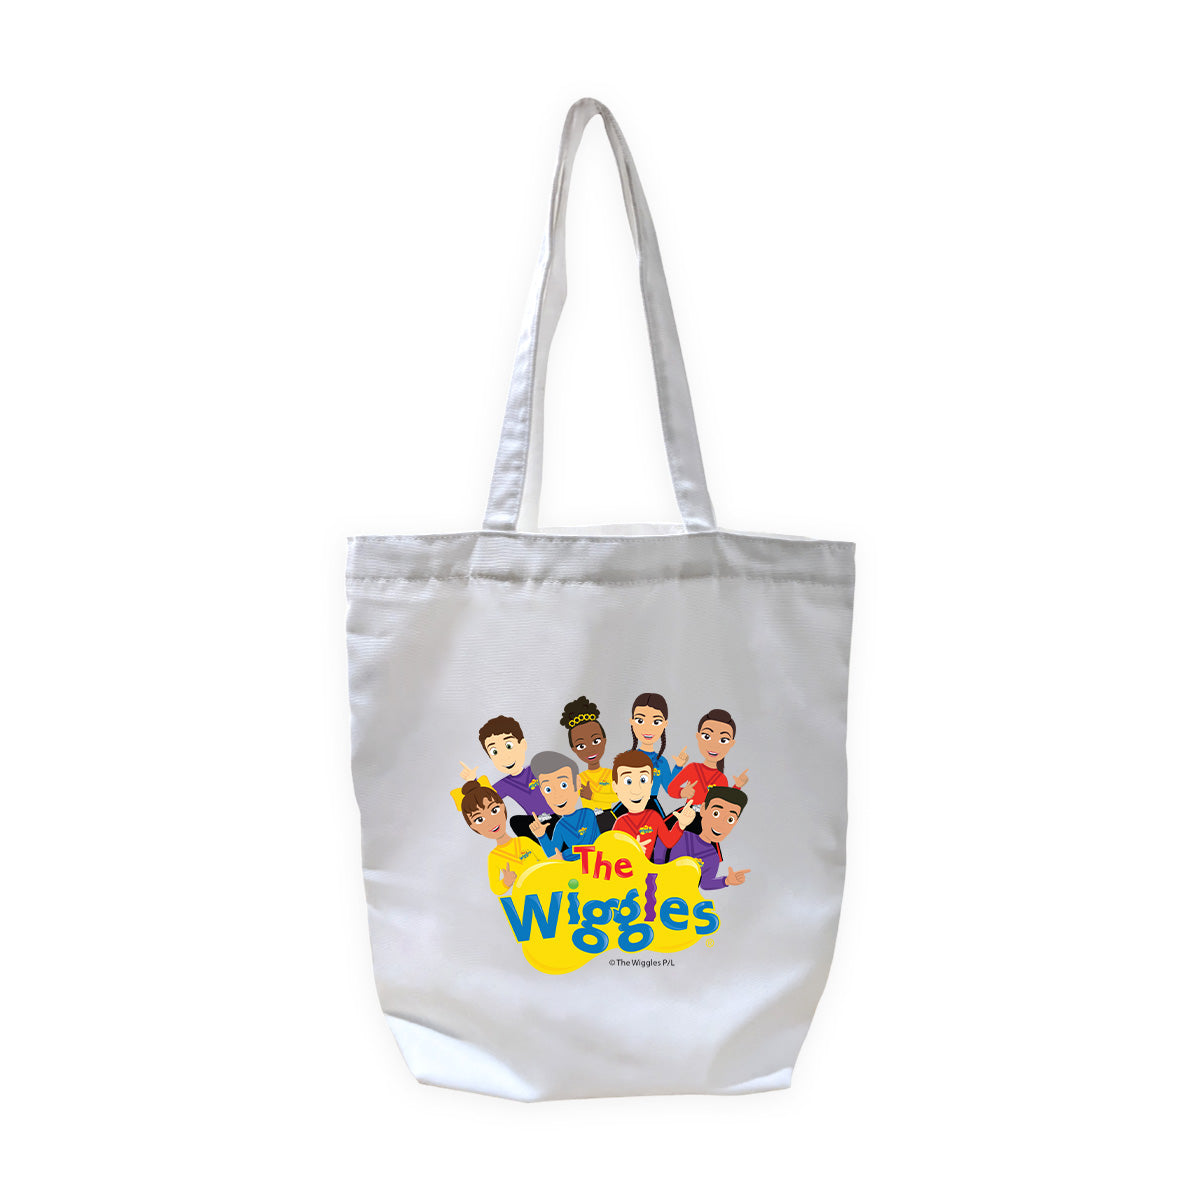 The Wiggles Tote